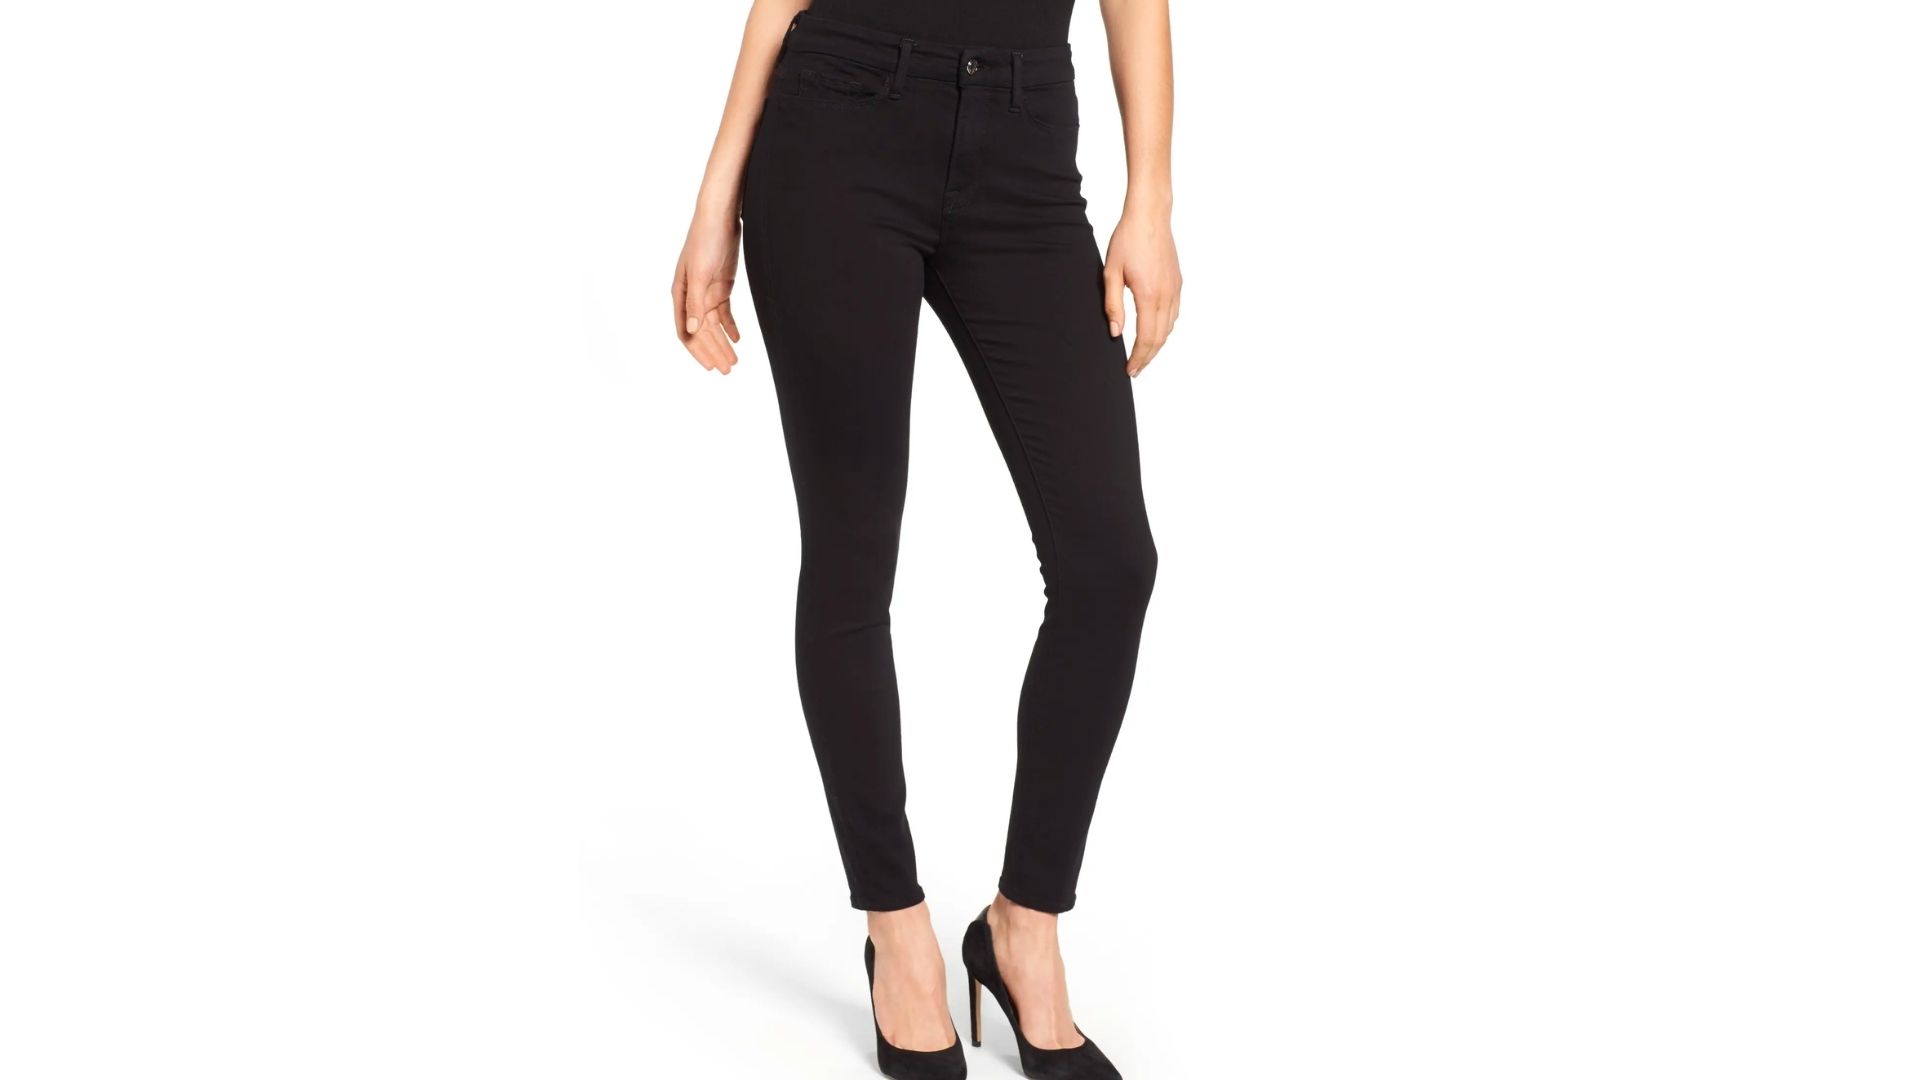 Best jeans for women over 50